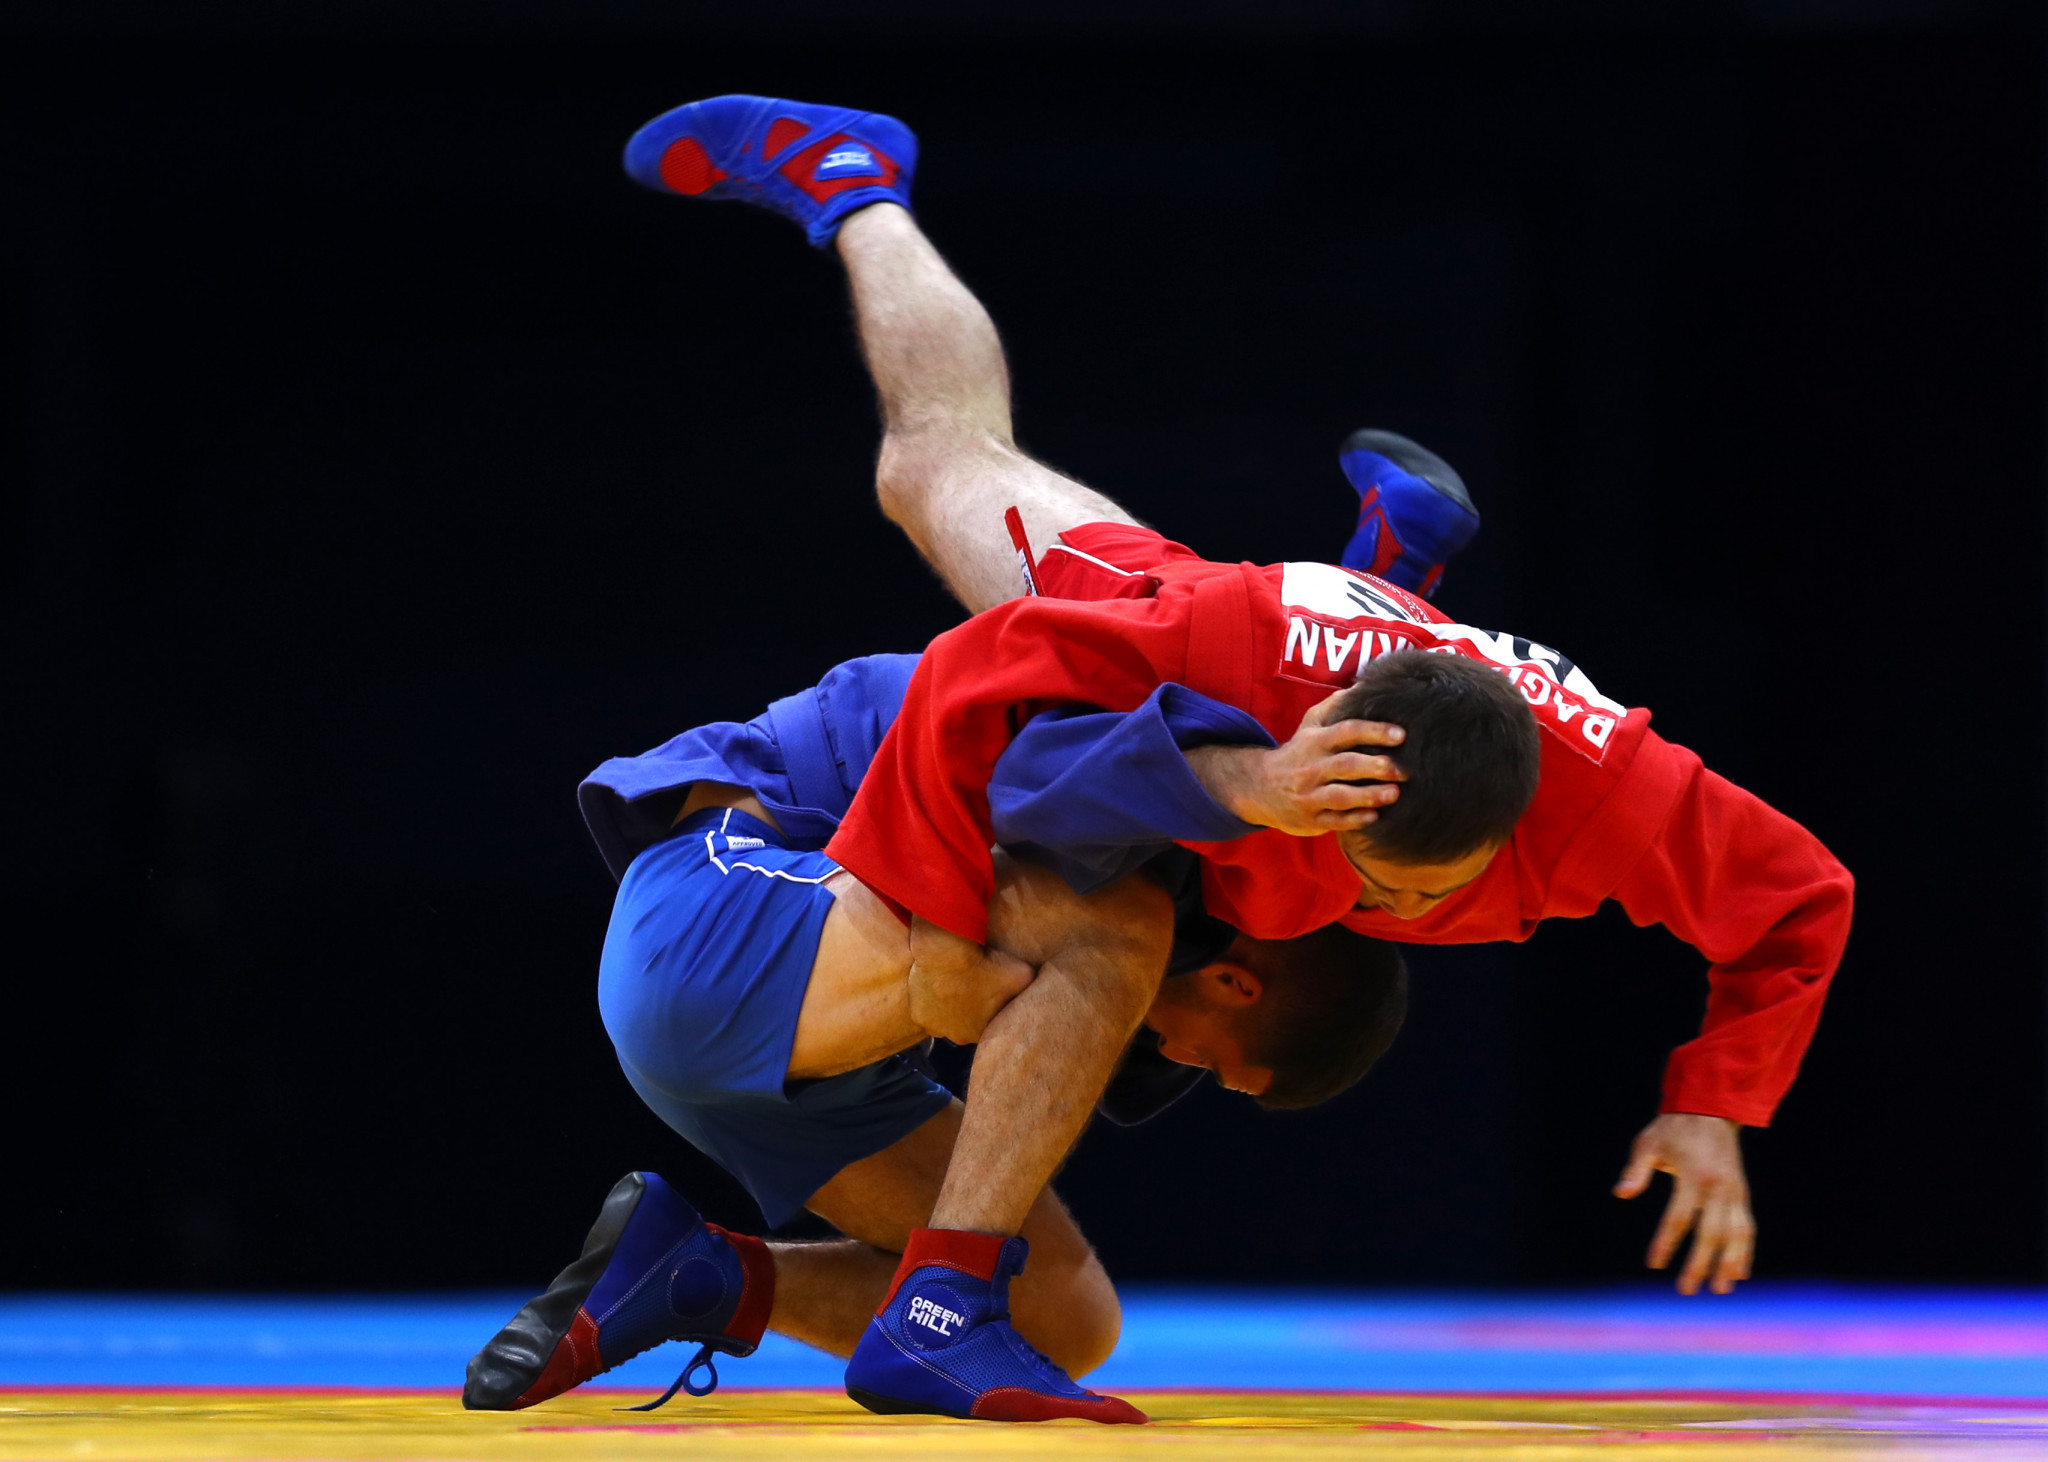 More environmental work will be done in the sport of sambo ©Getty Images